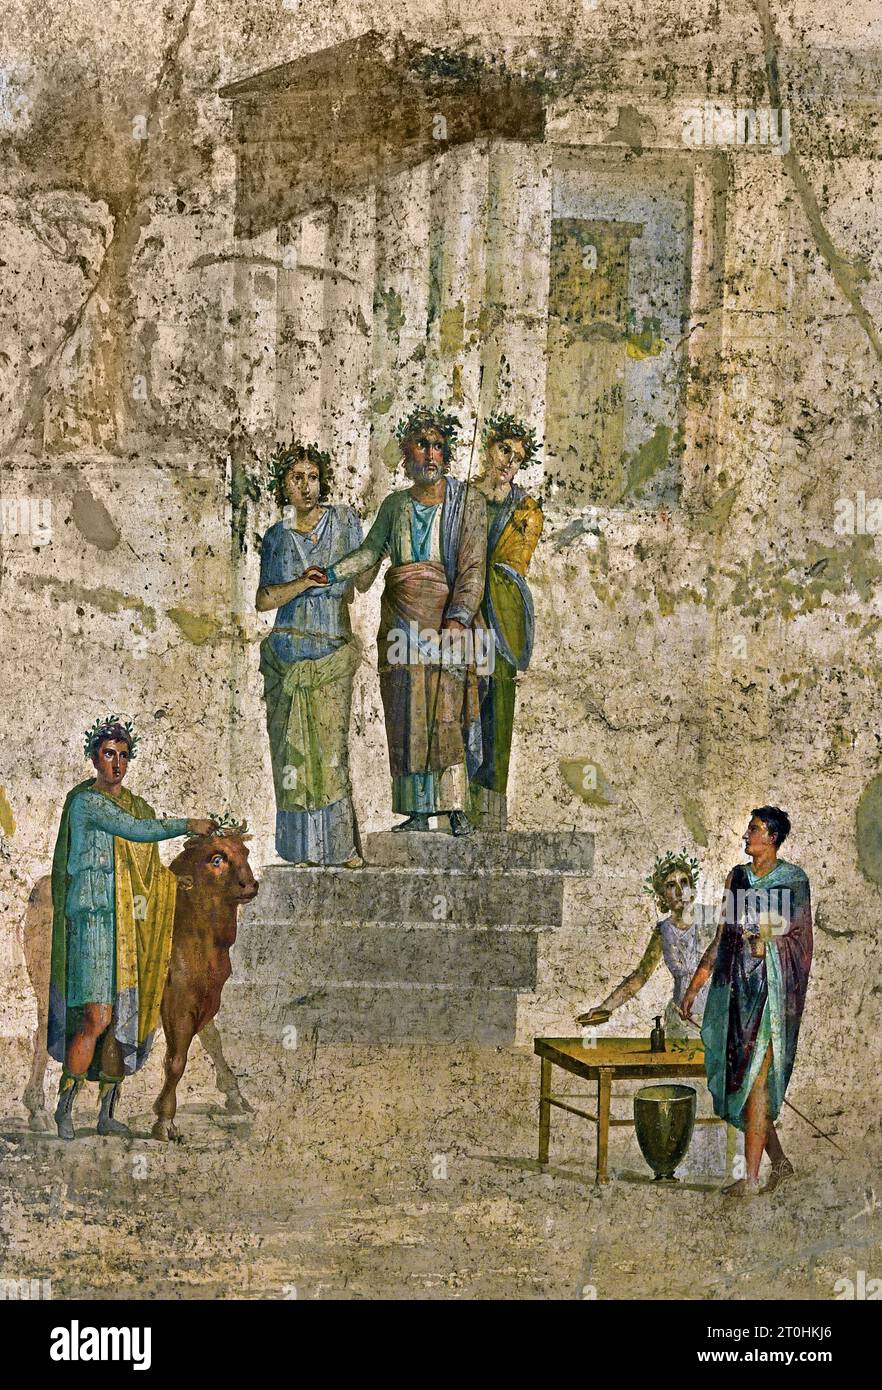 Encounter between Pelias and Jason. Pelias, king of Iolcos, standing on the steps of a temple recognises Jason by his missing sandal.  Fresco Pompeii Roman City is located near Naples in the Campania region of Italy. Pompeii was buried under 4-6 m of volcanic ash and pumice in the eruption of Mount Vesuvius in AD 79. Italy Stock Photo